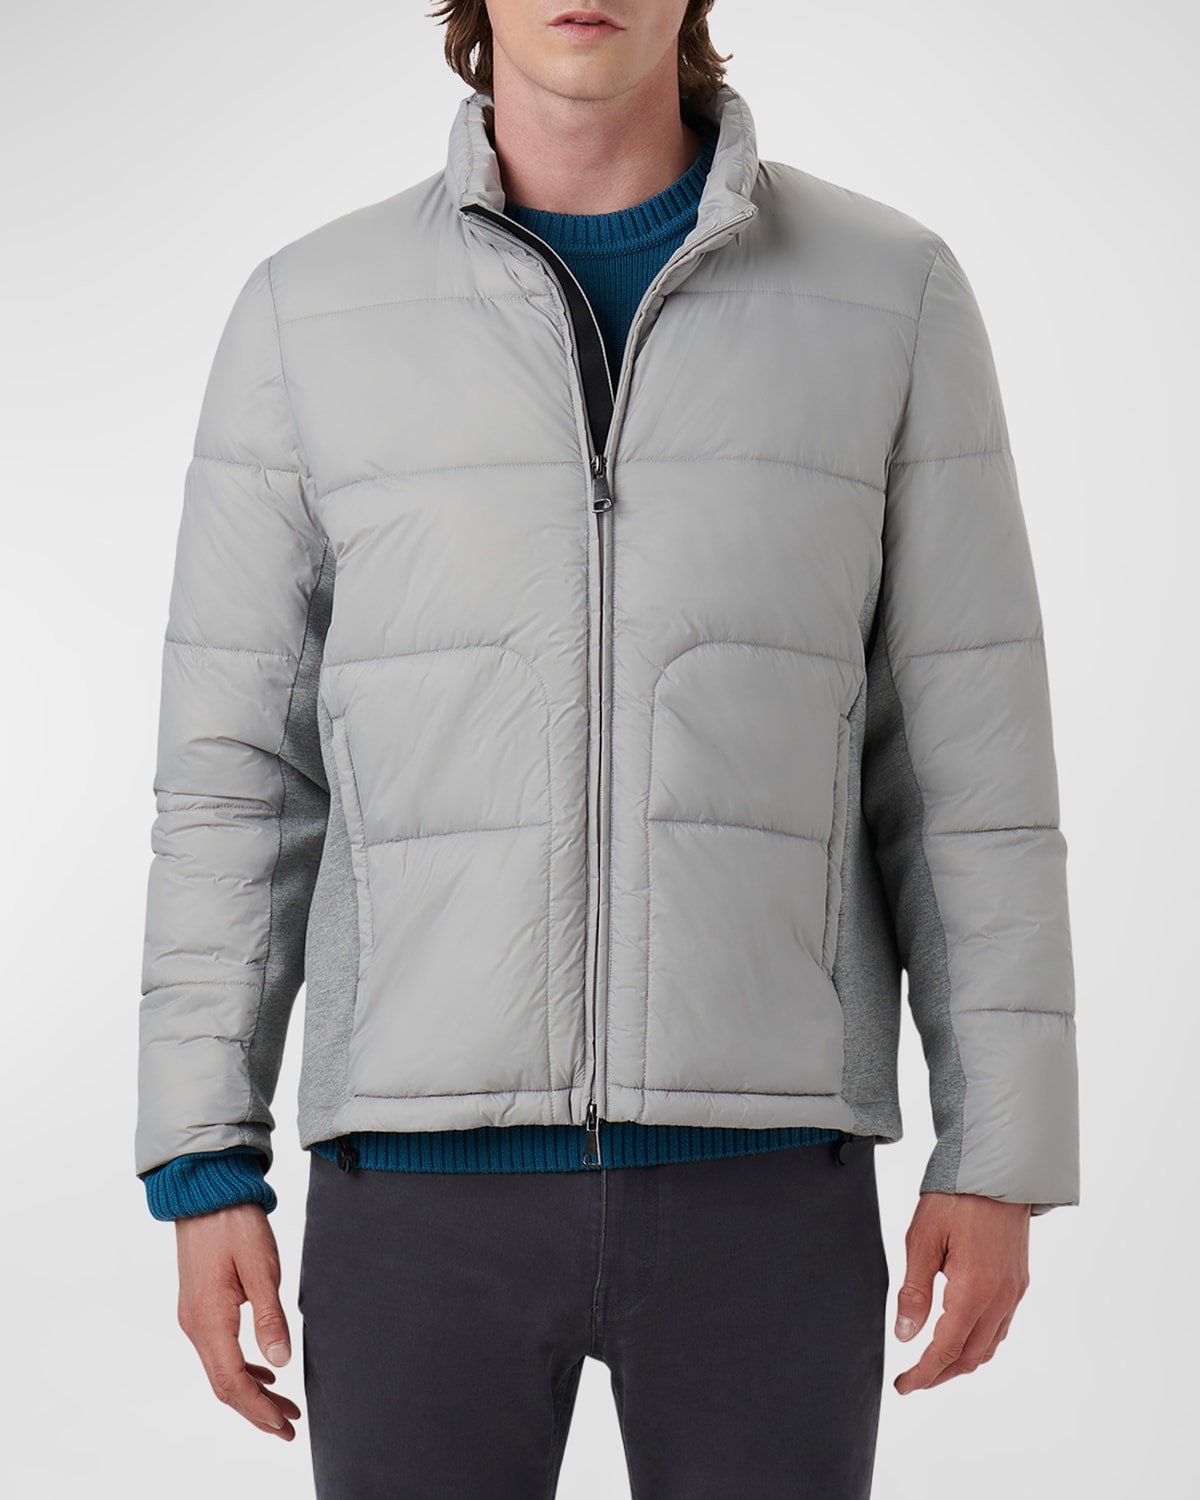 Men's Quilted Bomber Jacket with Stowaway Hood